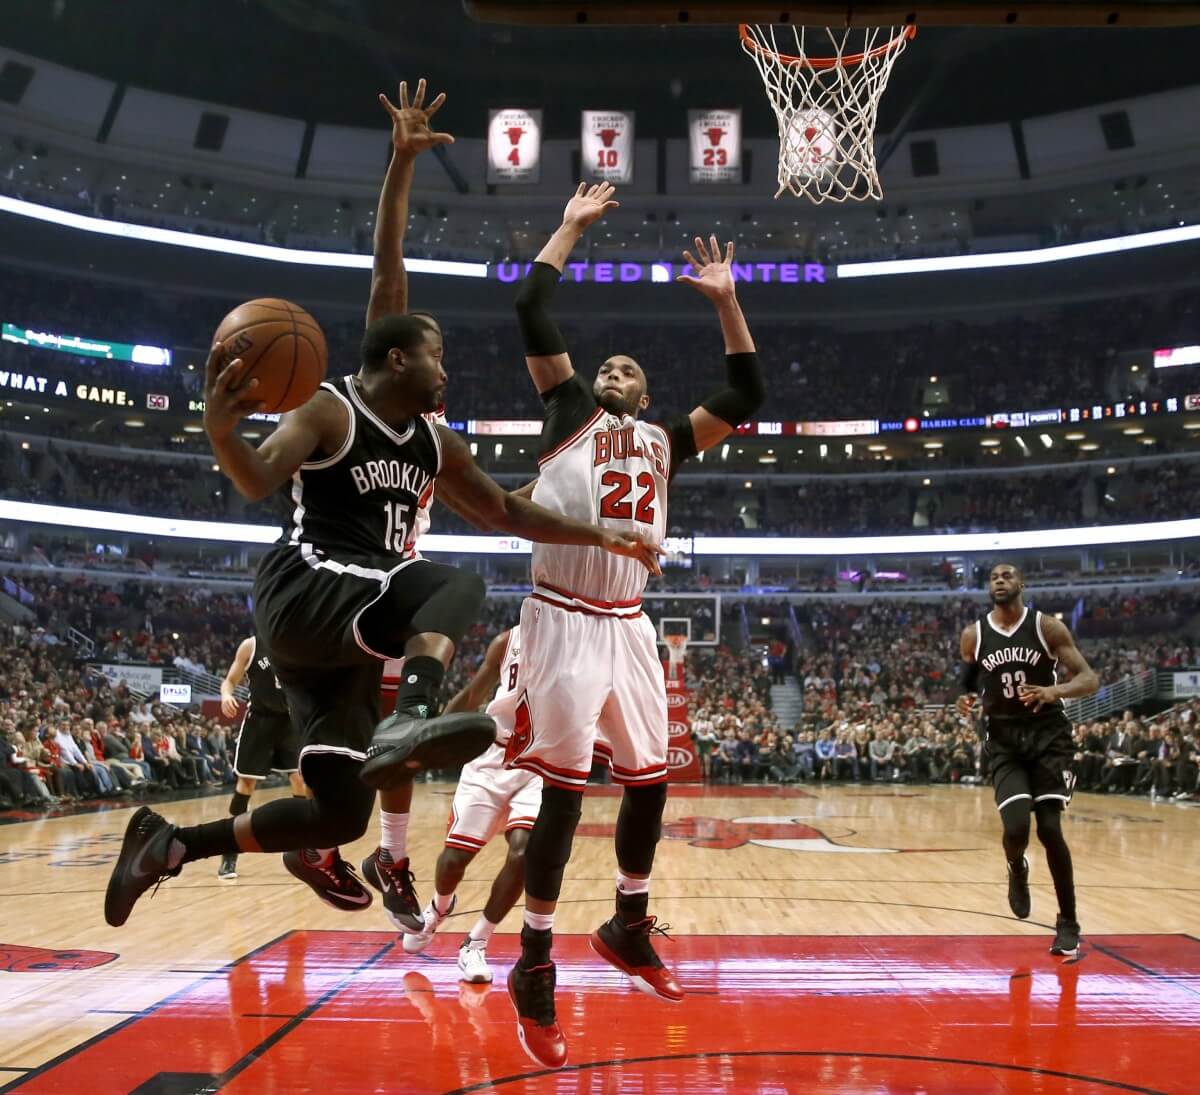 Brooklyn Nets guard Donald Sloan (15) looks to pass the ball past Chicago Bulls forward Taj Gibson (22) during the second half of an NBA basketball game Monday, Dec. 21, 2015, in Chicago. The Nets won 105-102. (AP Photo/Charles Rex Arbogast)